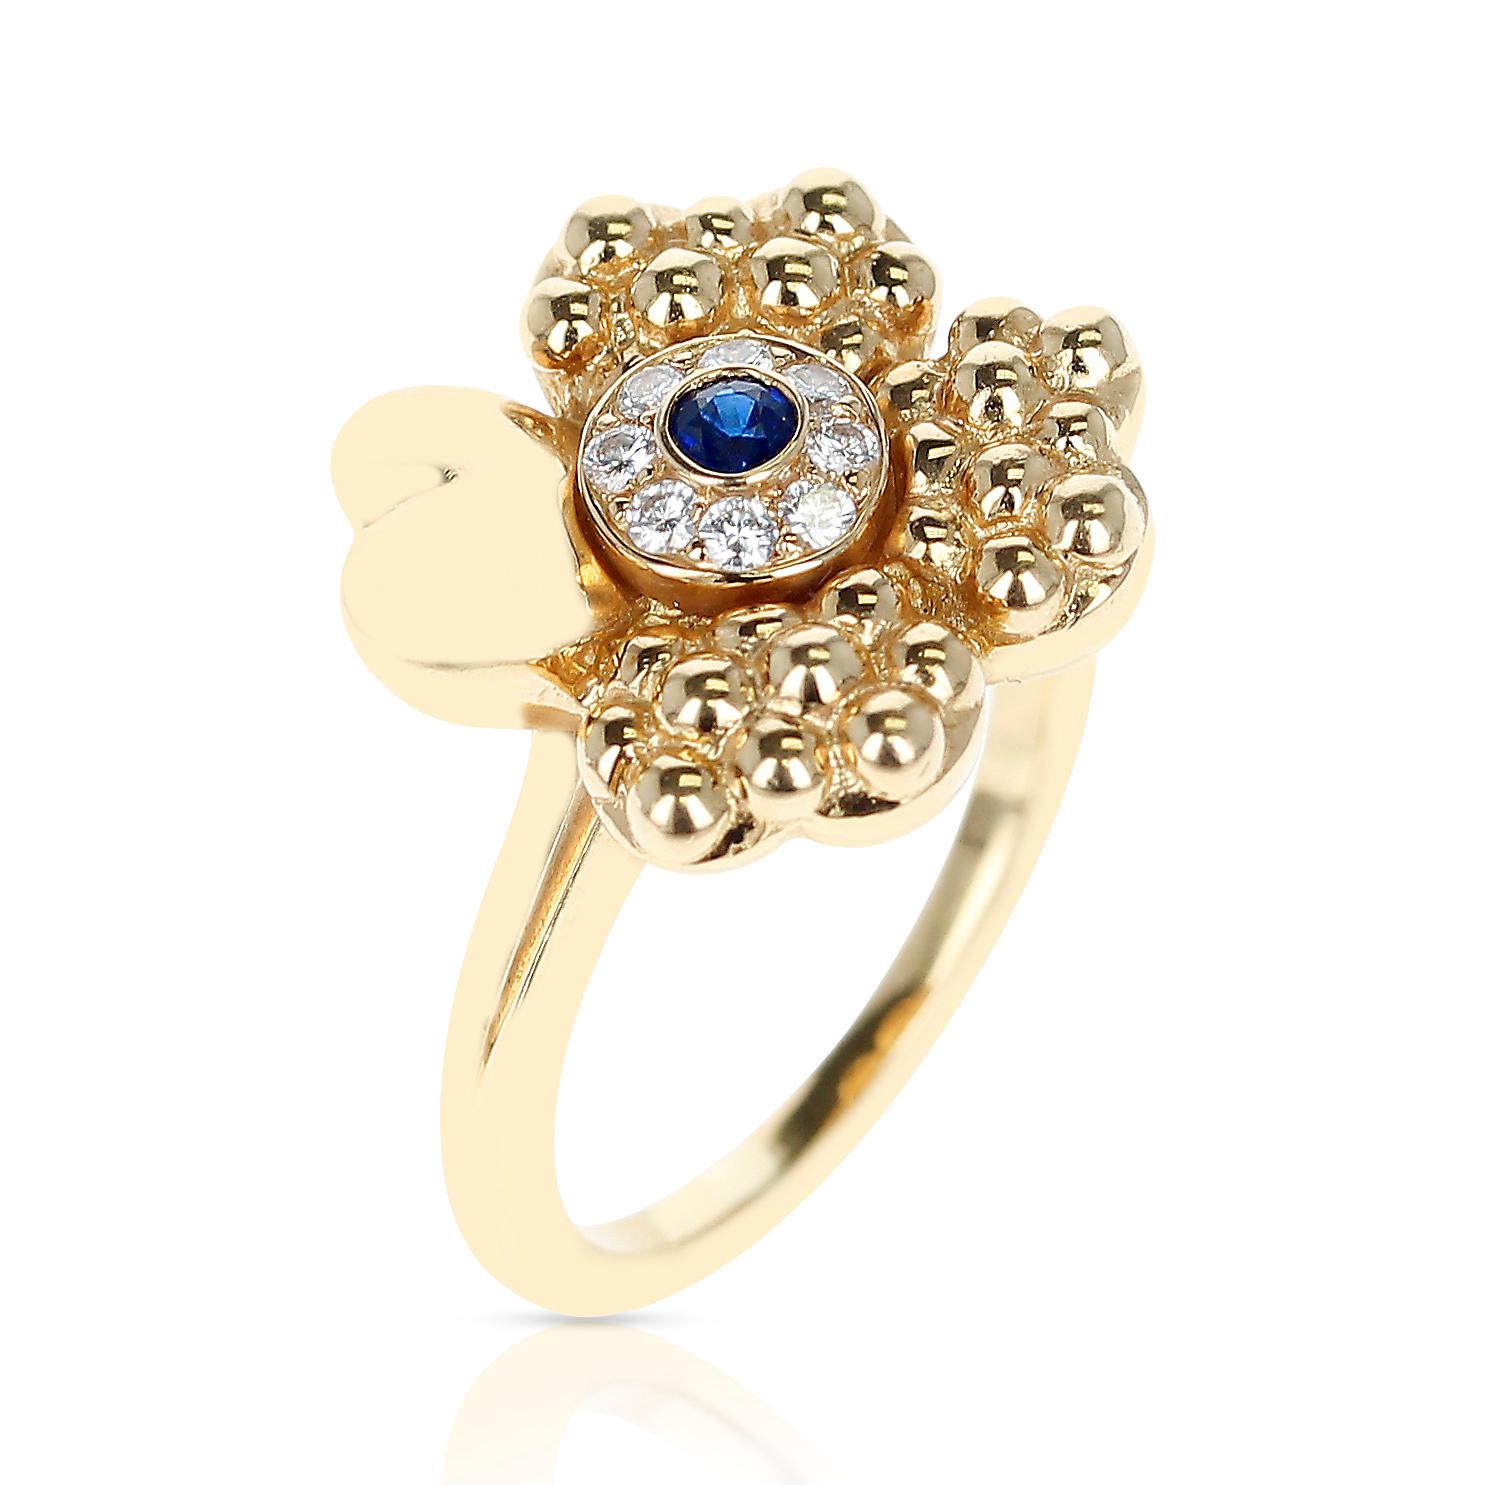 A Paris Clover Ring with Diamonds and a Center Blue Sapphire made in 18 Karat Yellow Gold. Total Weight: 6.96 grams. Ring Size US 5.50. 


